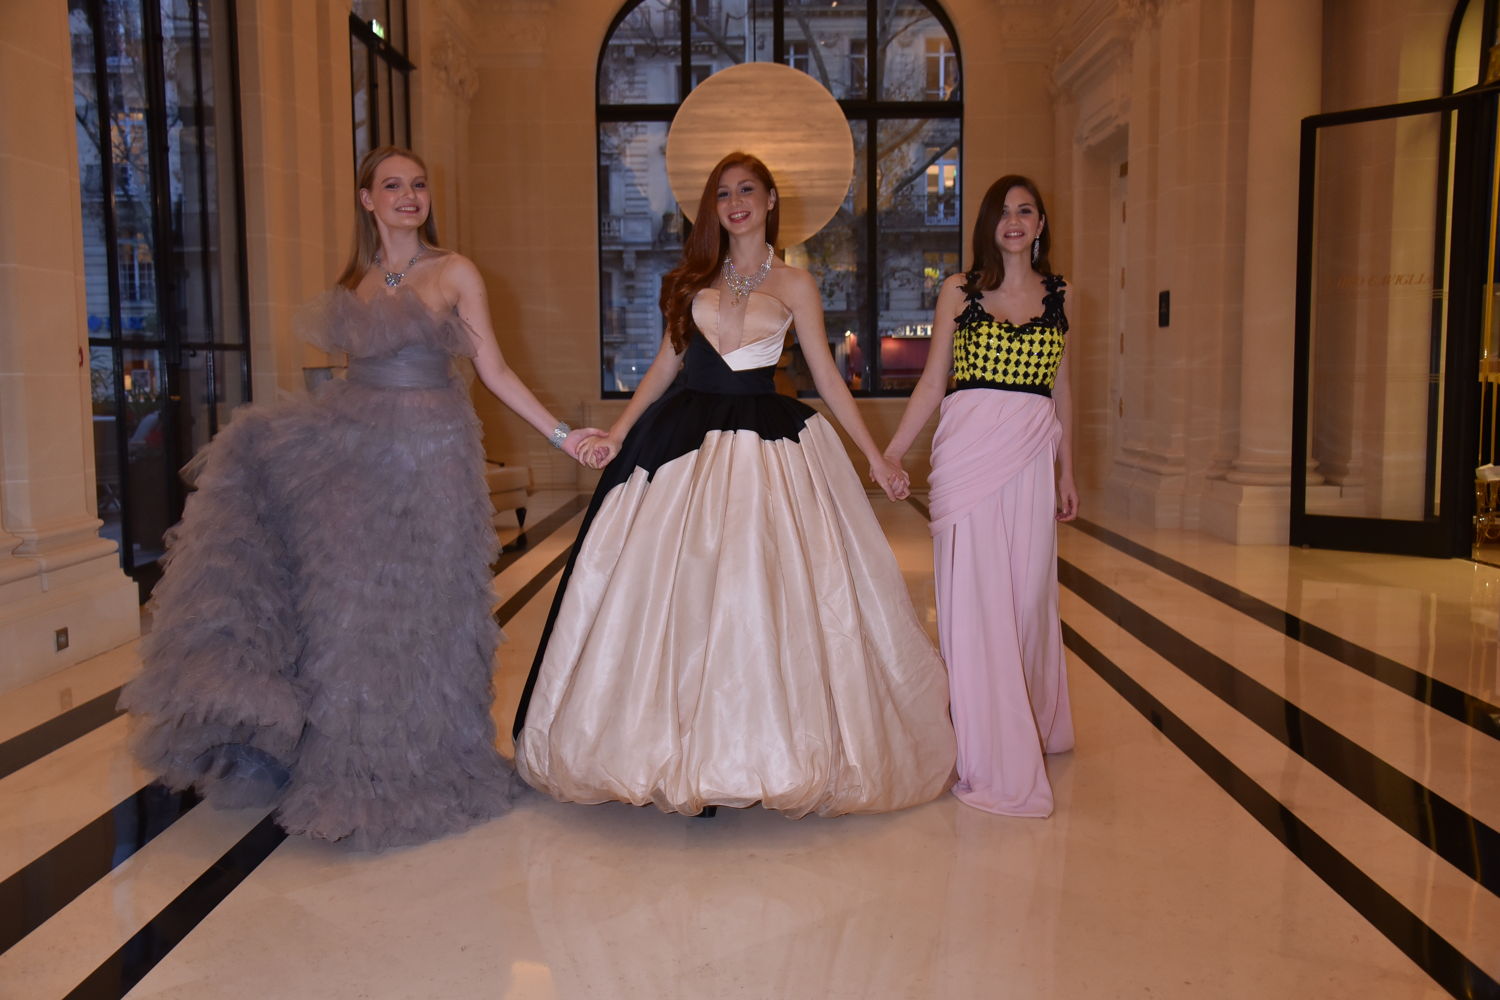 Alexina Fontes Williams in Yanina Couture, Marchioness Altea Patrizi Naro Montoro in Stephane Rolland HC and Maïa Twombly in Giambattista Valli HC (jewelery by Payal New York), Photo Jean Luce Huré